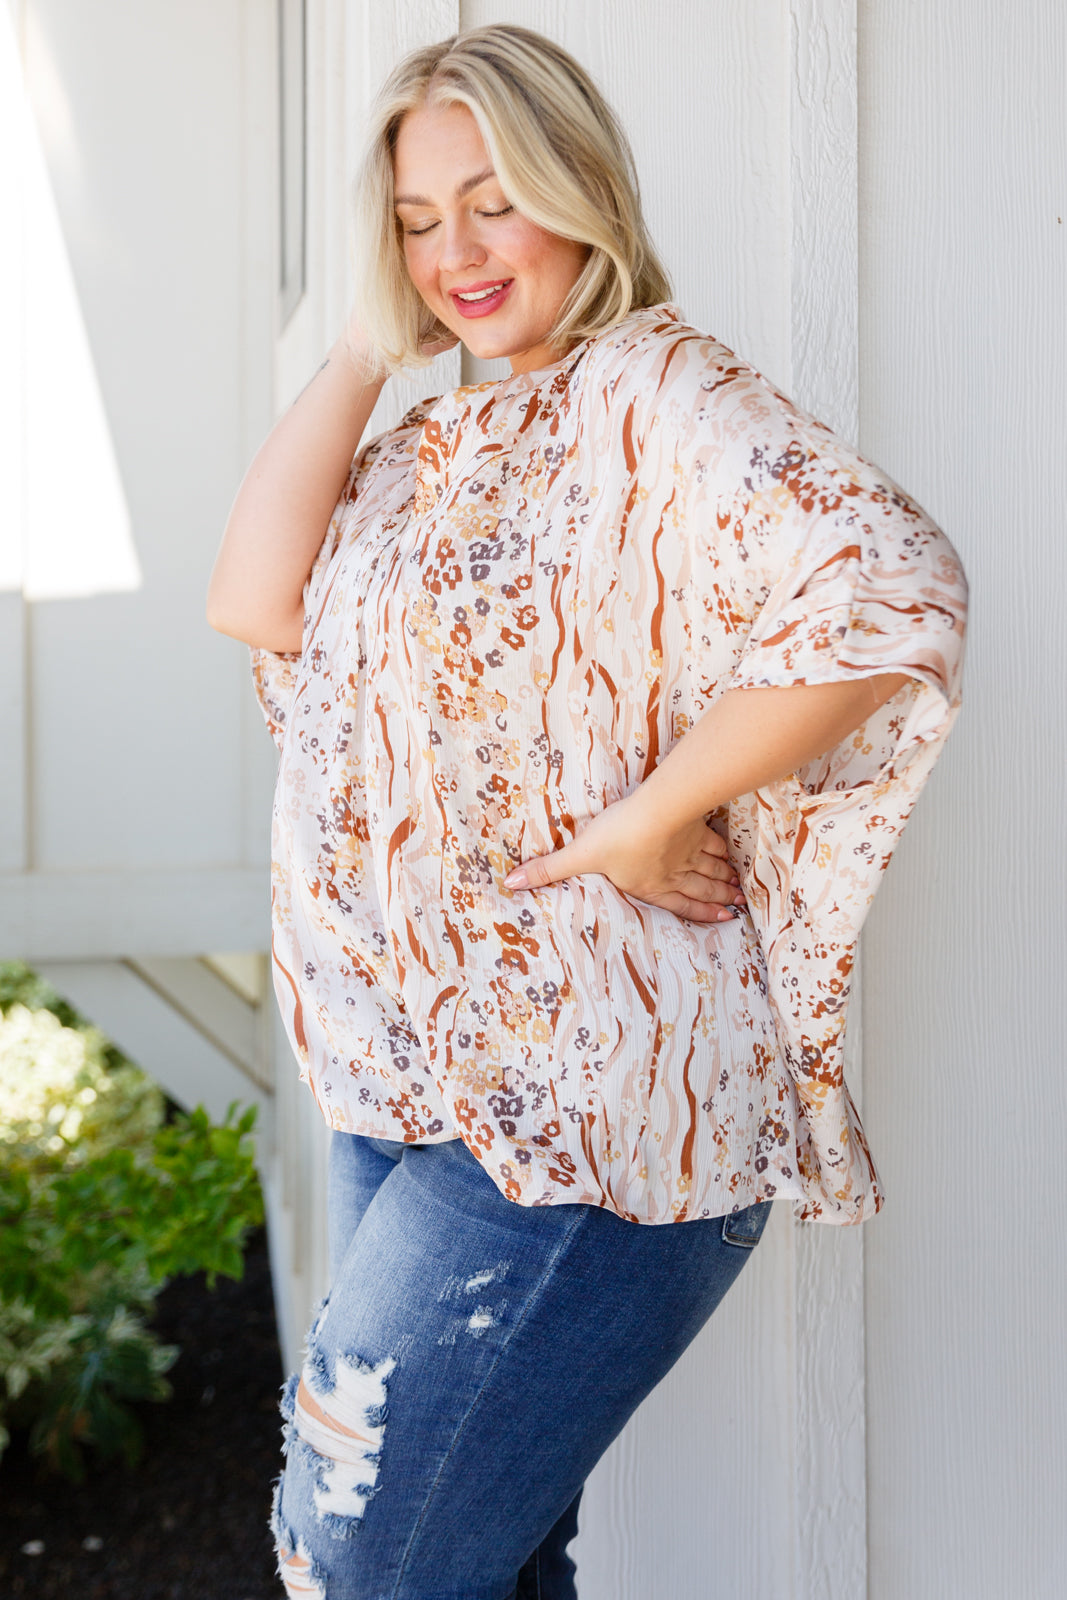 Take a chance on the Take a Chance Mixed Print Top! Its modern v-neckline, pleated front, and dolman sleeves create a boxy fit that flatters any body type. Combining a mix of prints, this top can instantly take any look from ordinary to extraordinary — perfect for dressing up or down. Dare to stand out! S - 3X